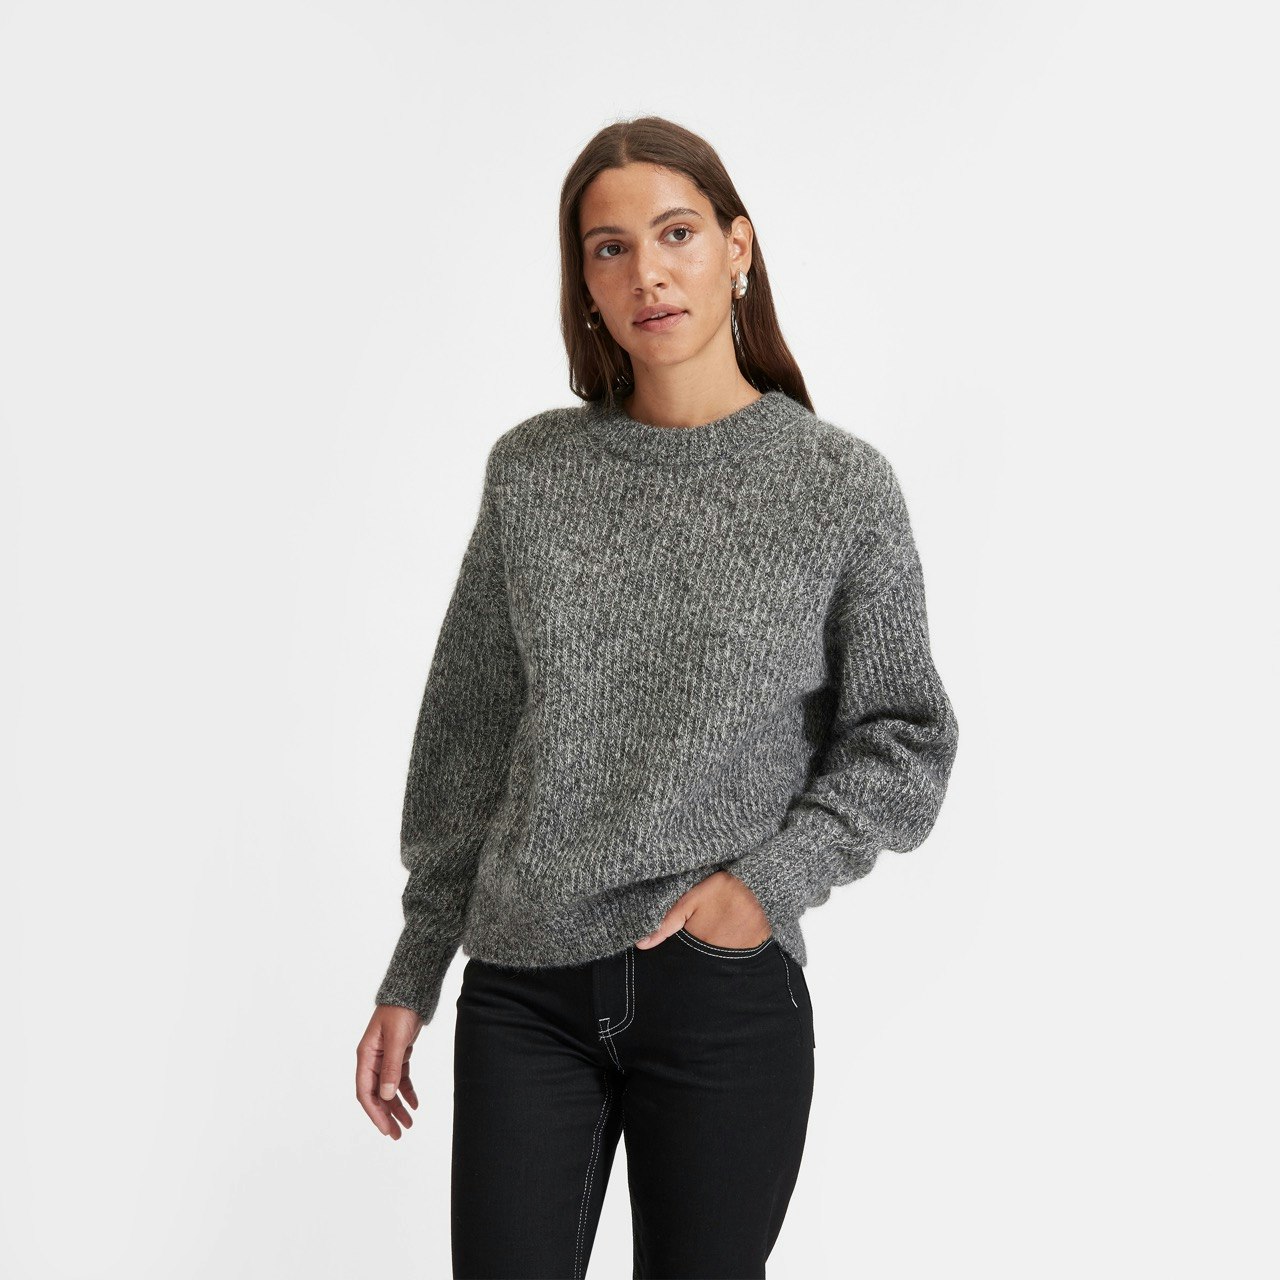 a model wearing Everlane's oversized alpaca crewneck sweater in charcoal twist, with black pants